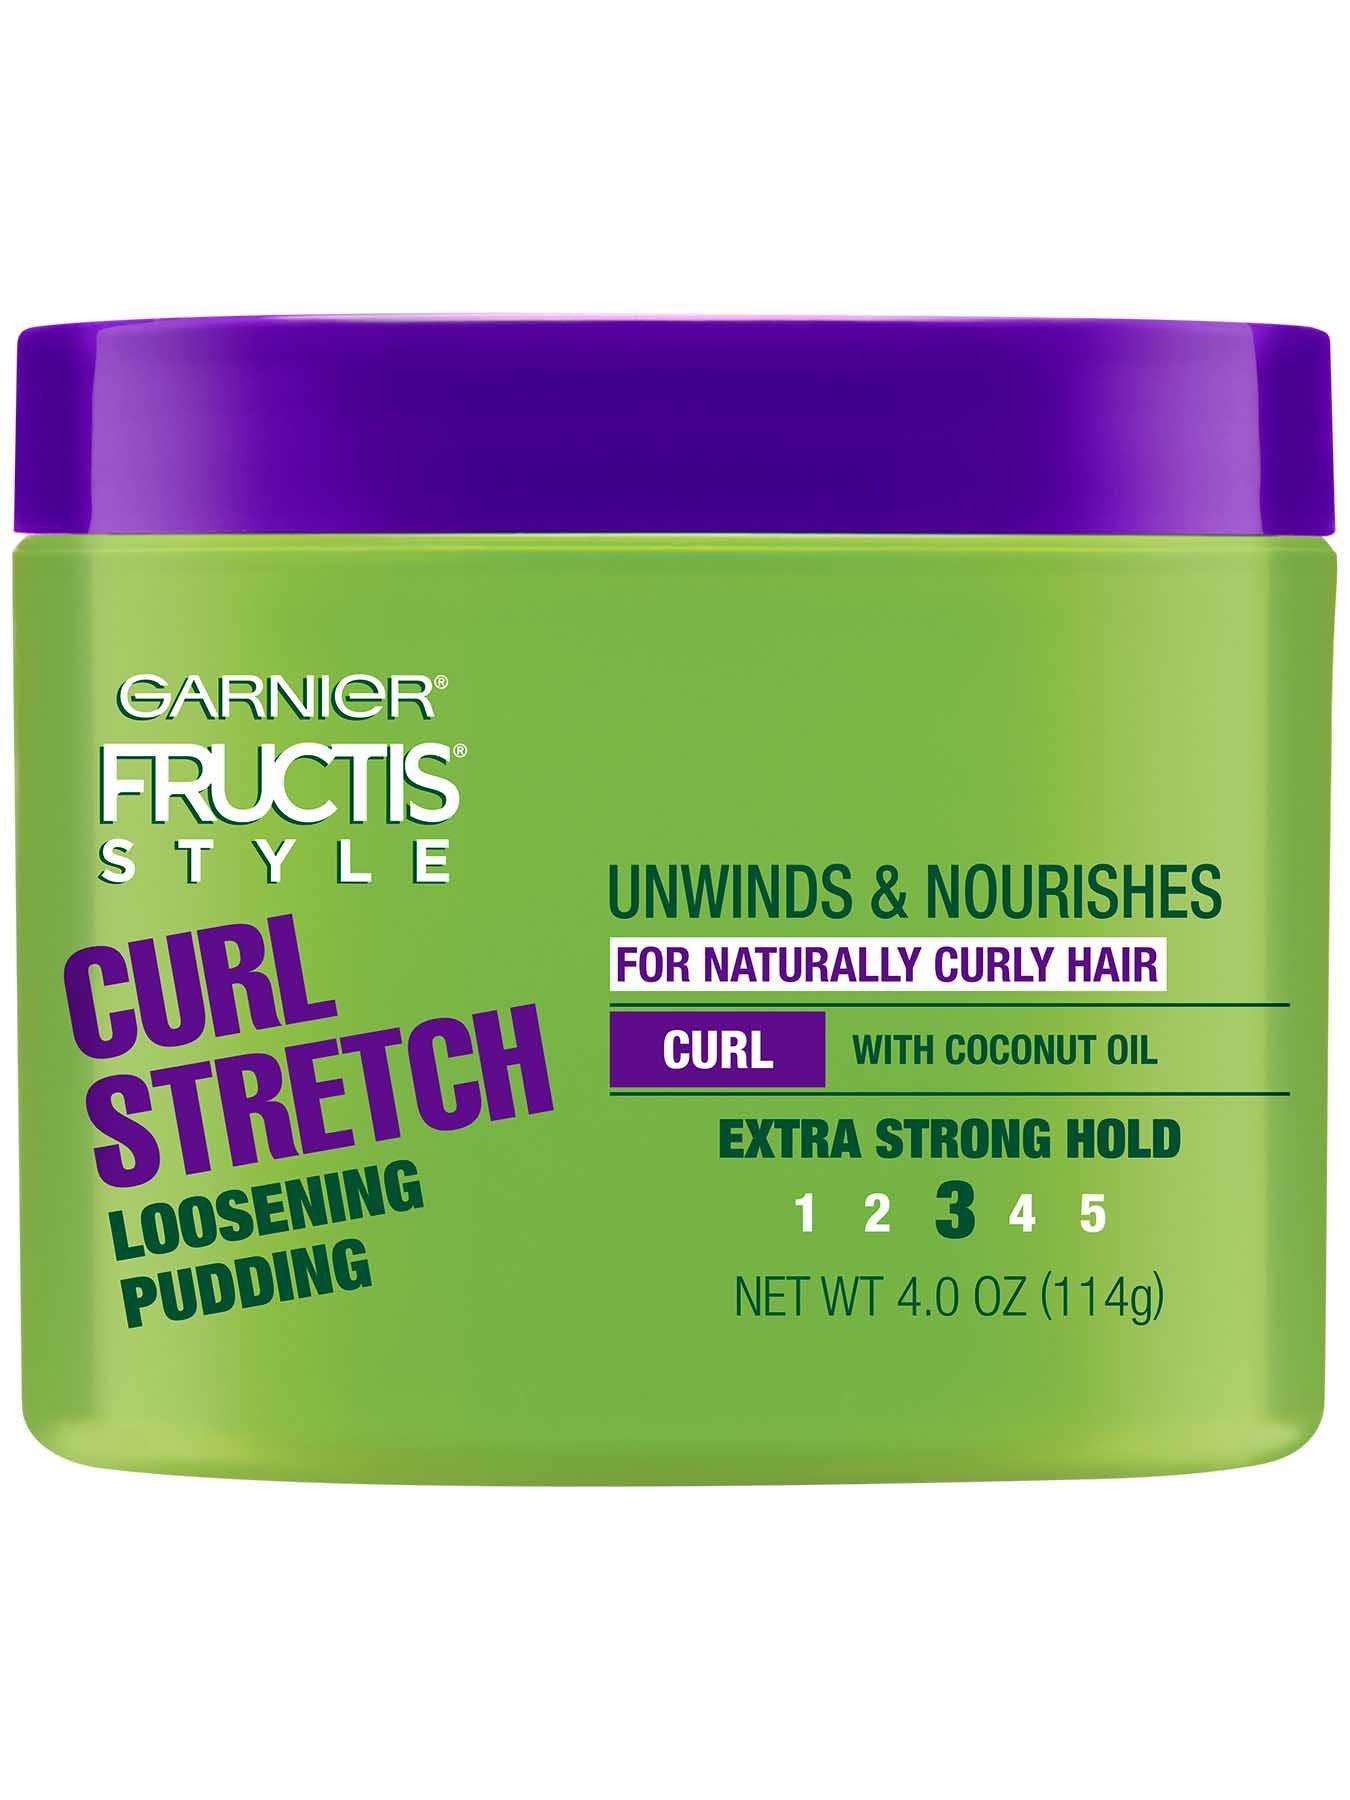 Front view of Curl Stretch Loosening Pudding.